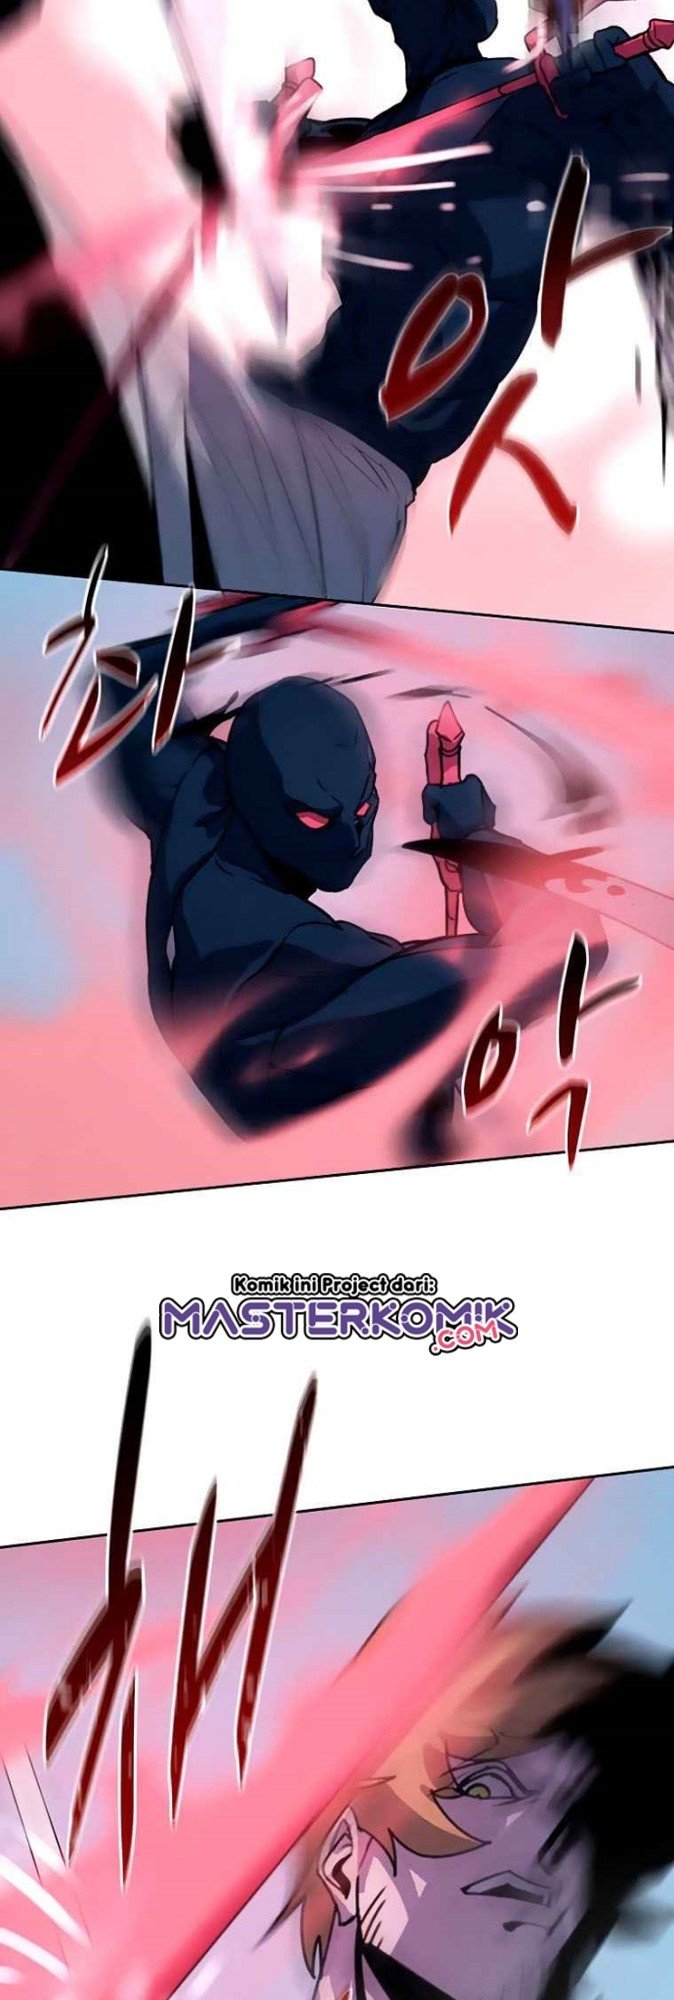 Book Eater Chapter 40